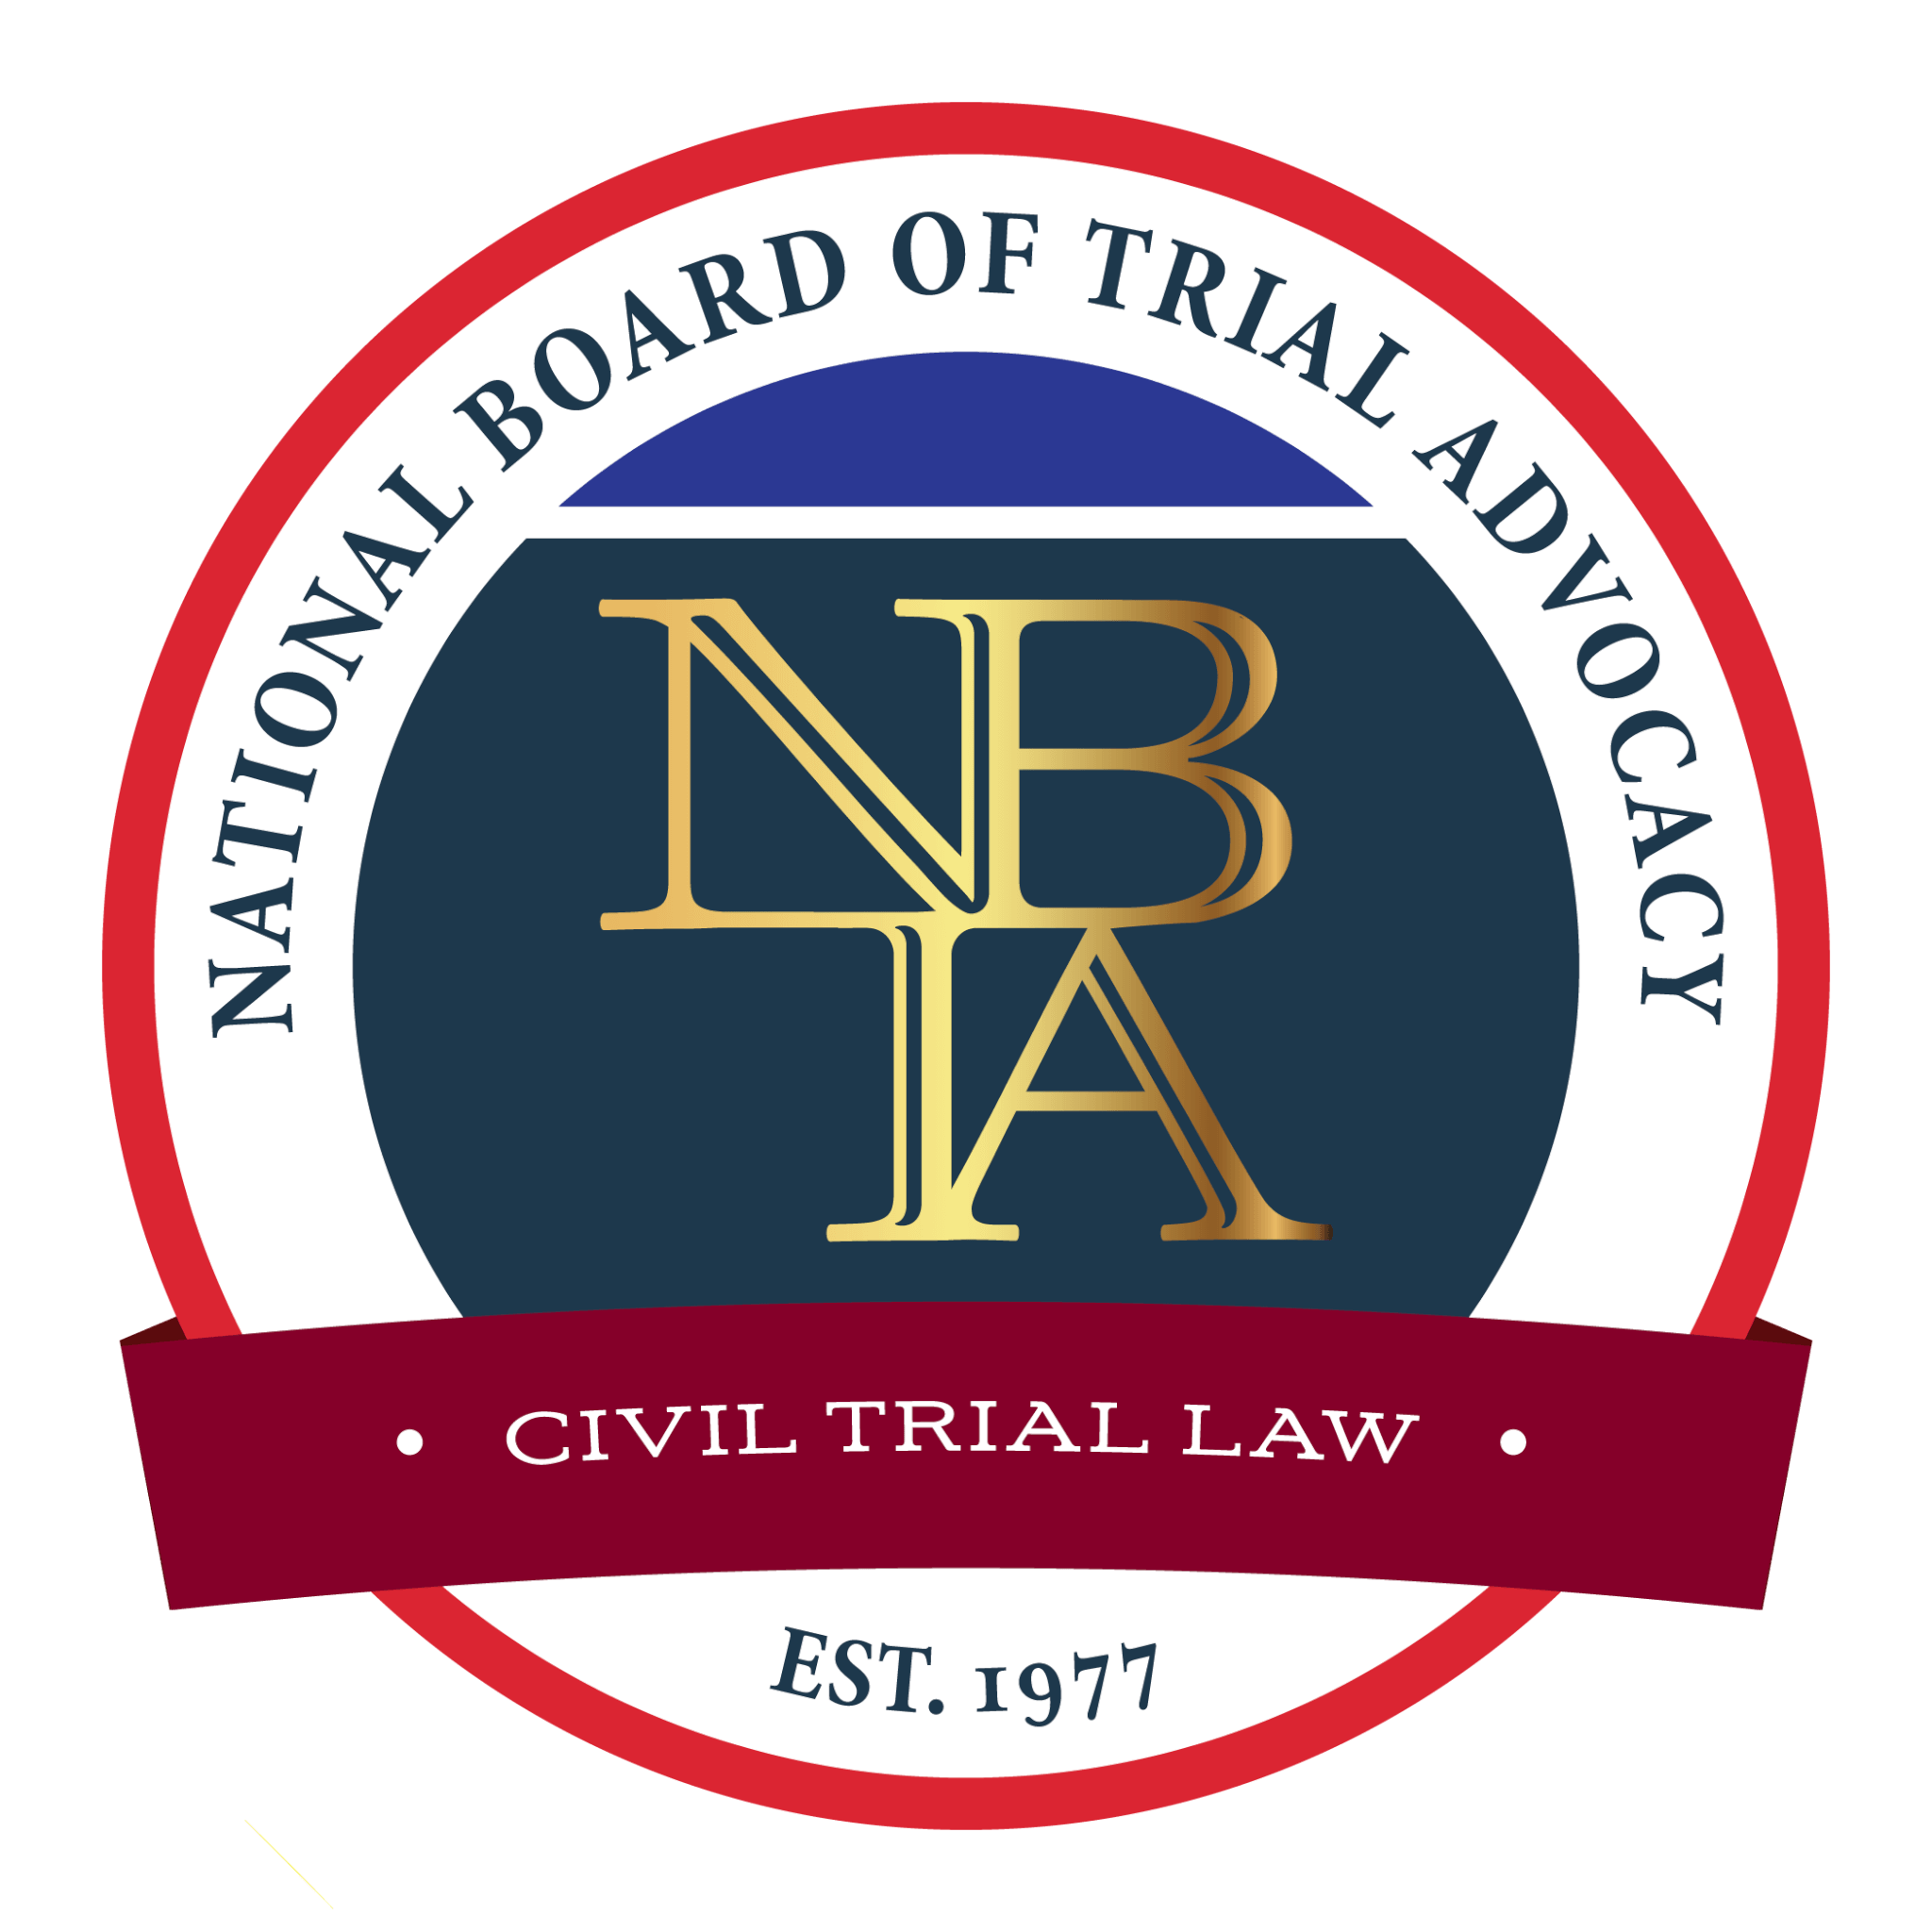 National Board of Trial Advocacy - Best personal injury lawyer - law office - business lawyer – accident lawyer – Steckler Wayne & Love Law Firm Dallas Waco East TX